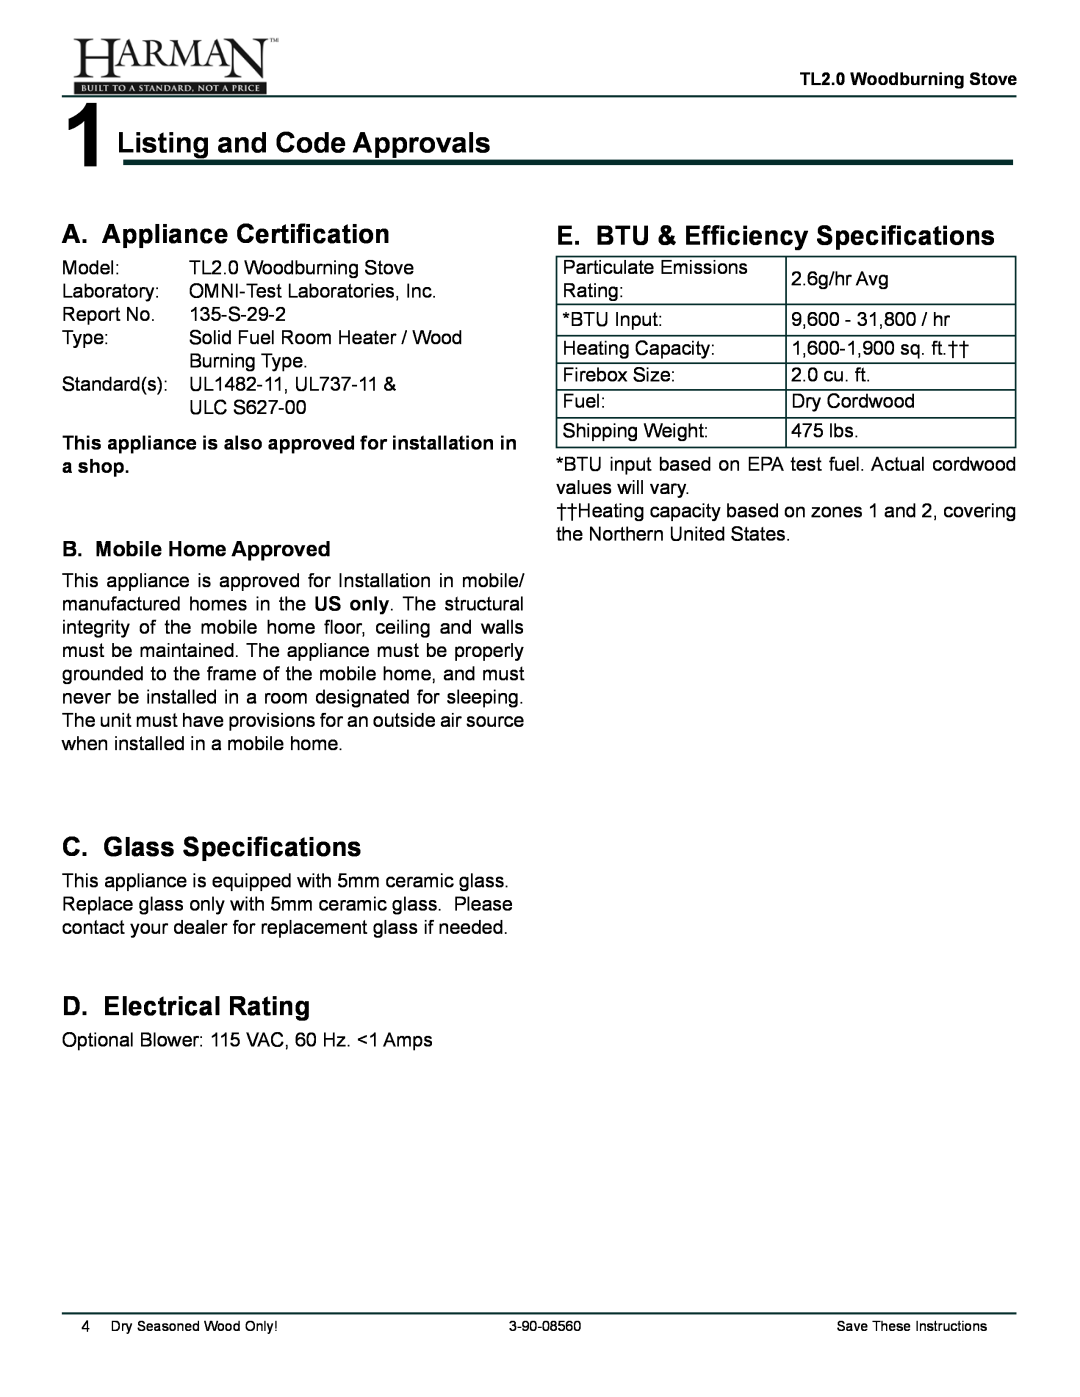 Harman Stove Company TL2.0 1Listing and Code Approvals, A. Appliance Certification, E. BTU & Efficiency Specifications 